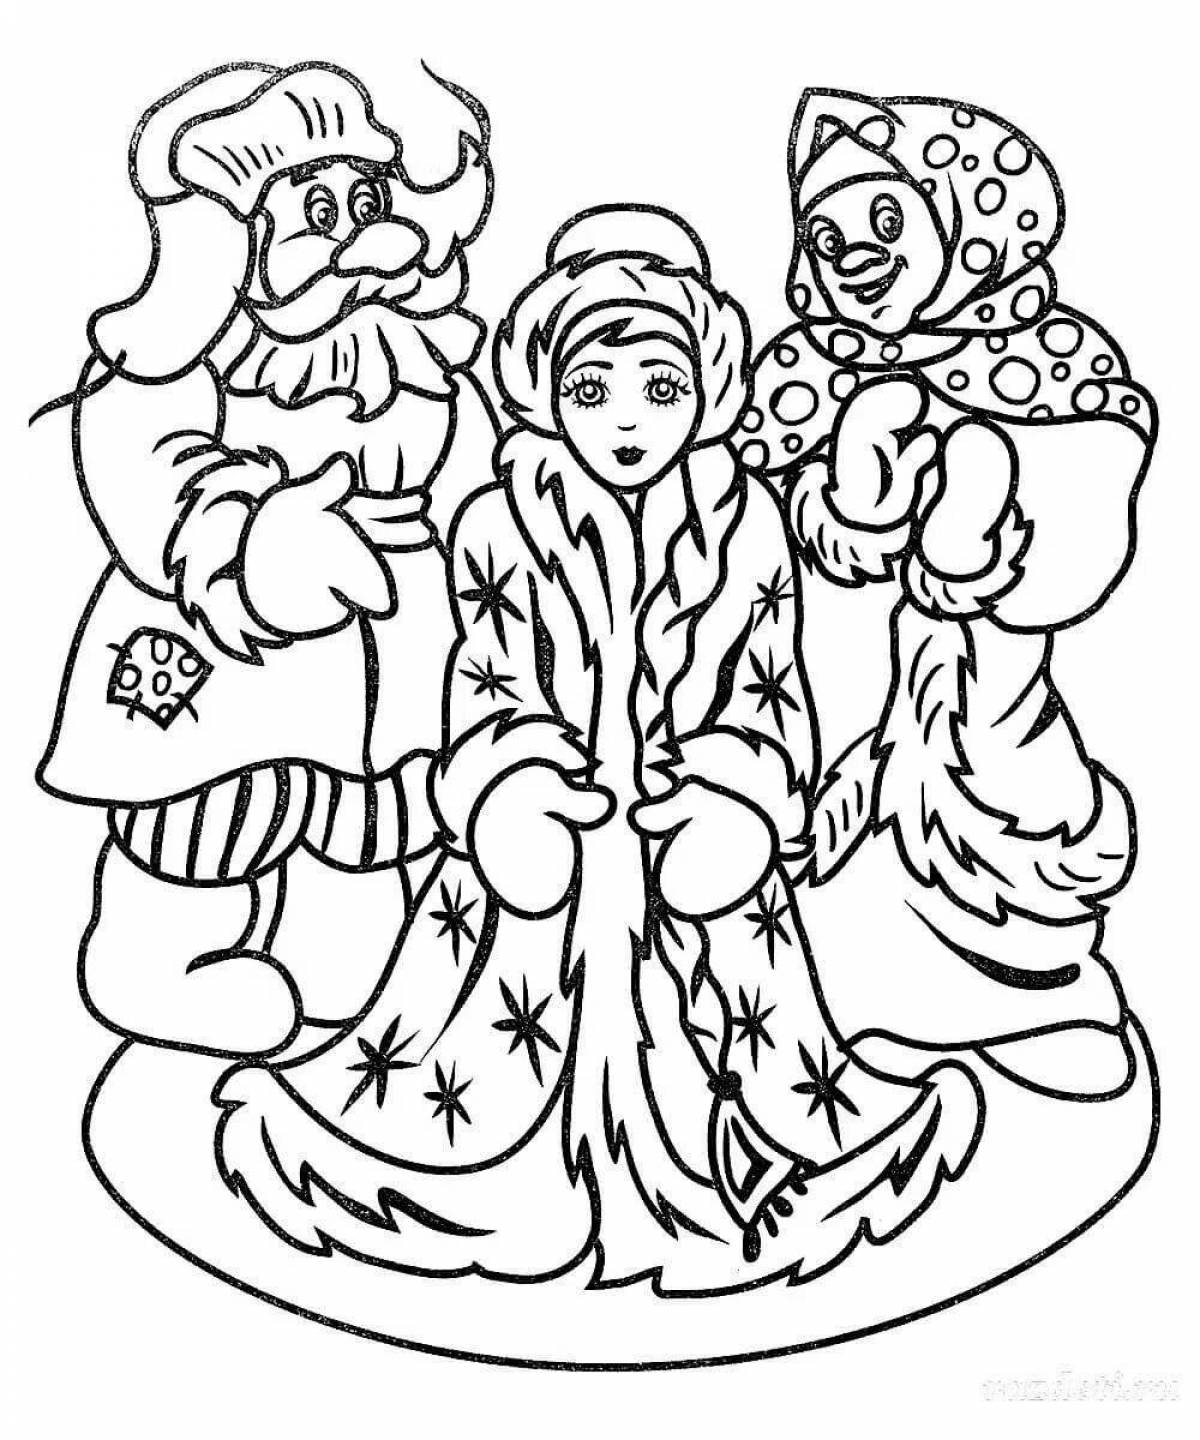 Exquisite Snow Maiden and Lel coloring